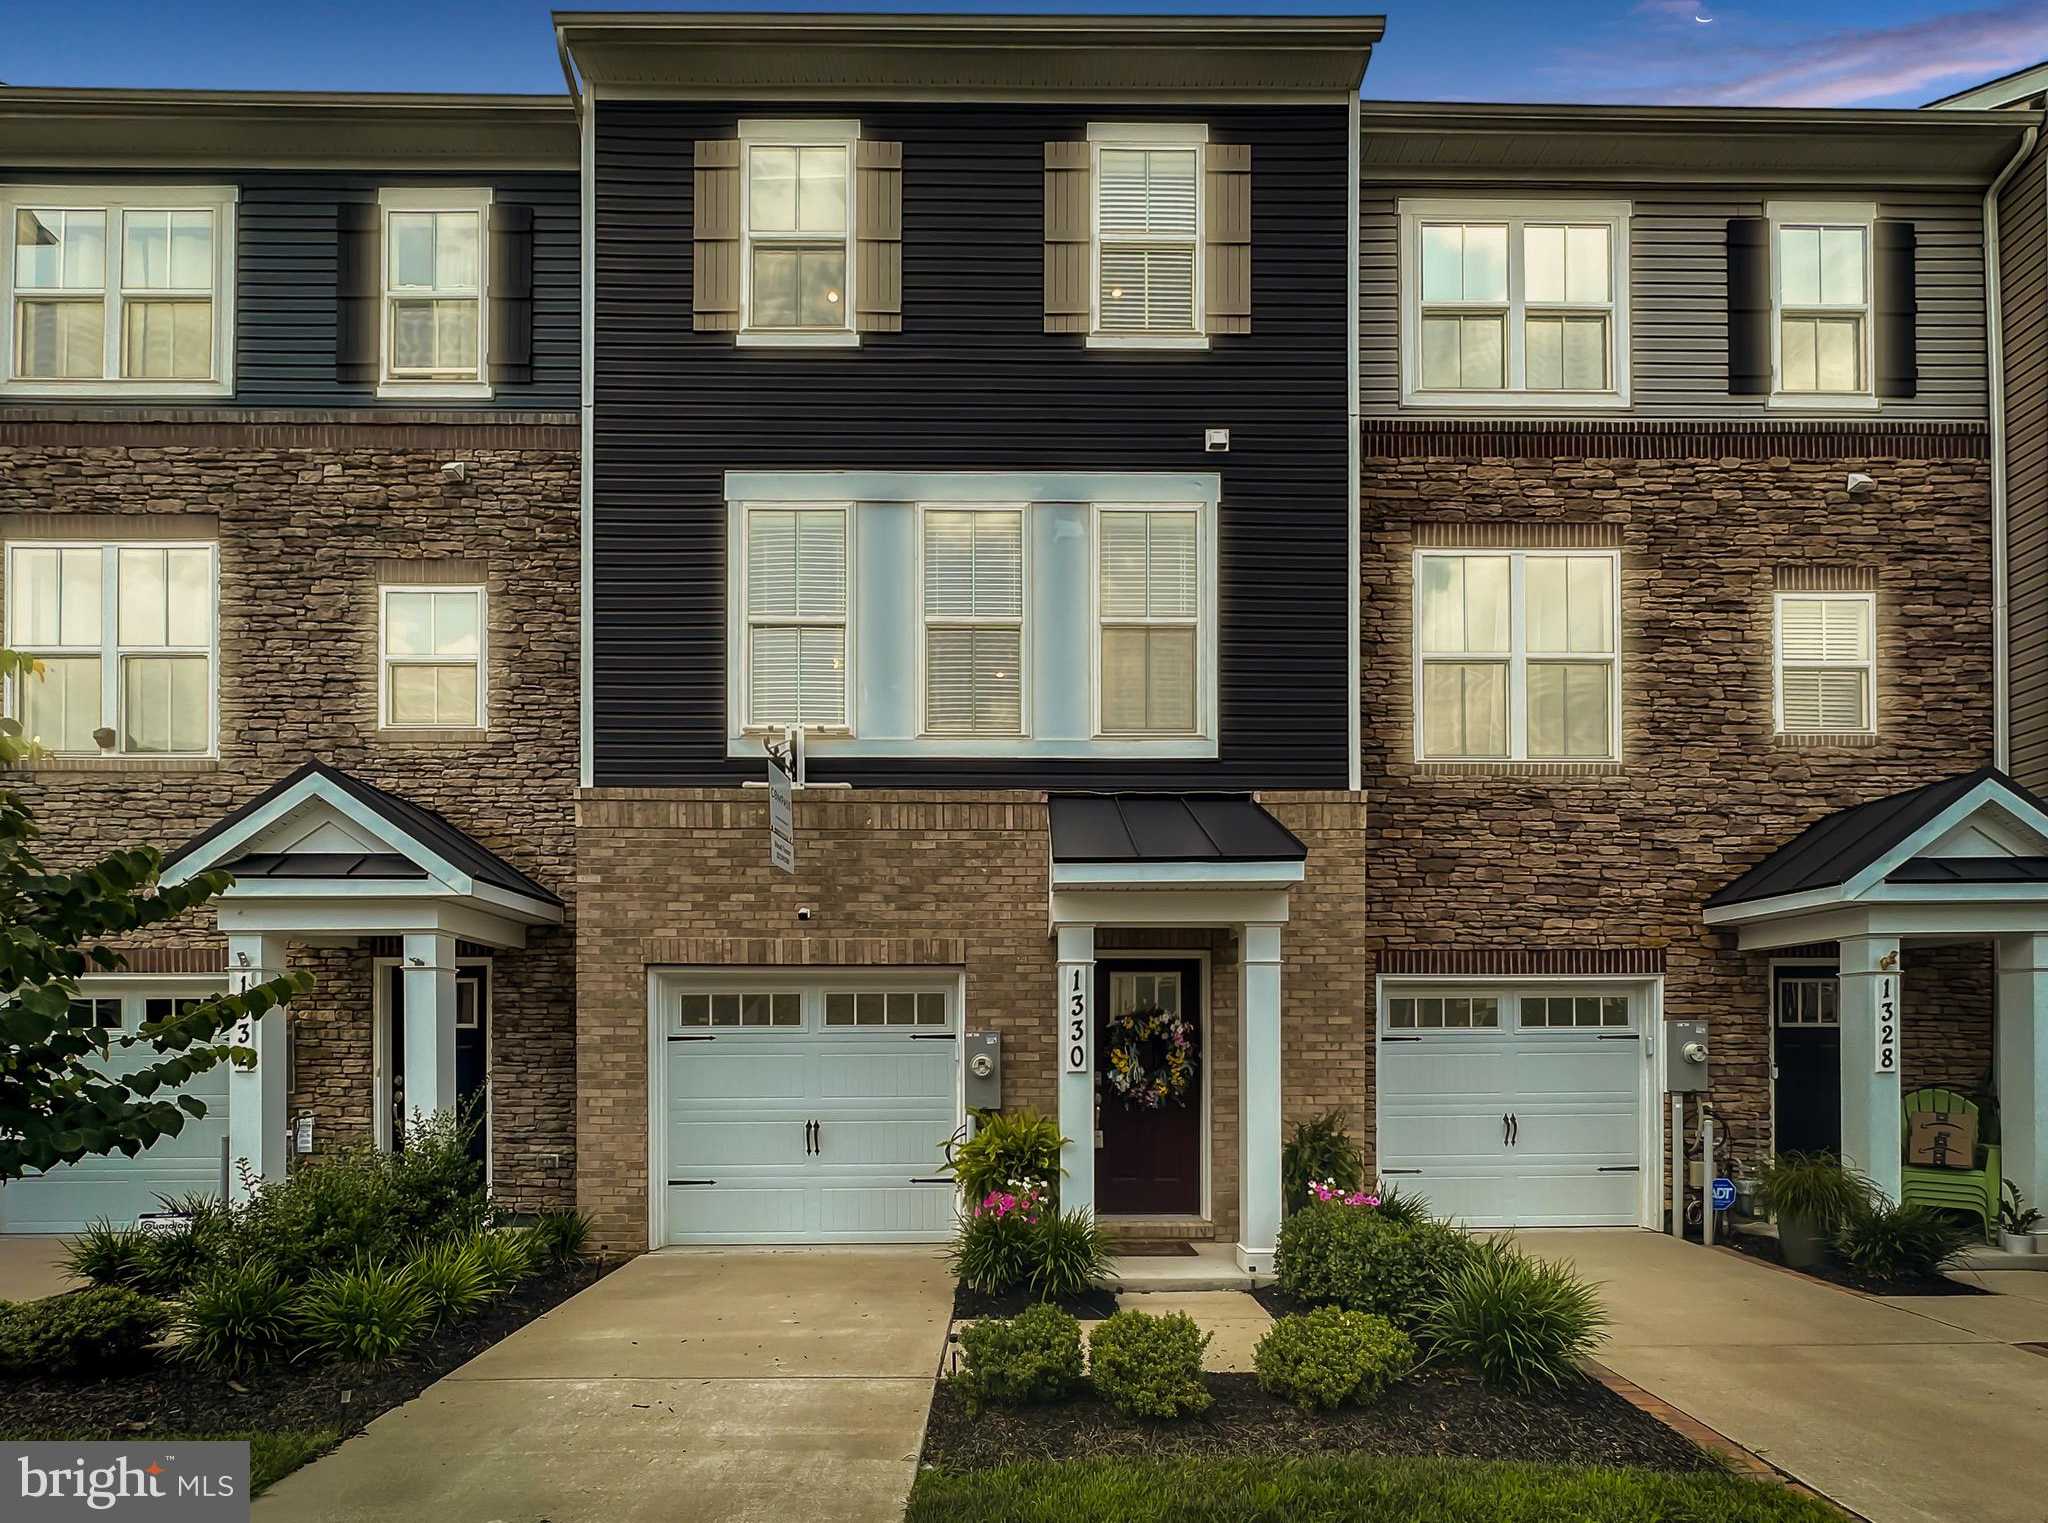 View CROFTON, MD 21114 townhome